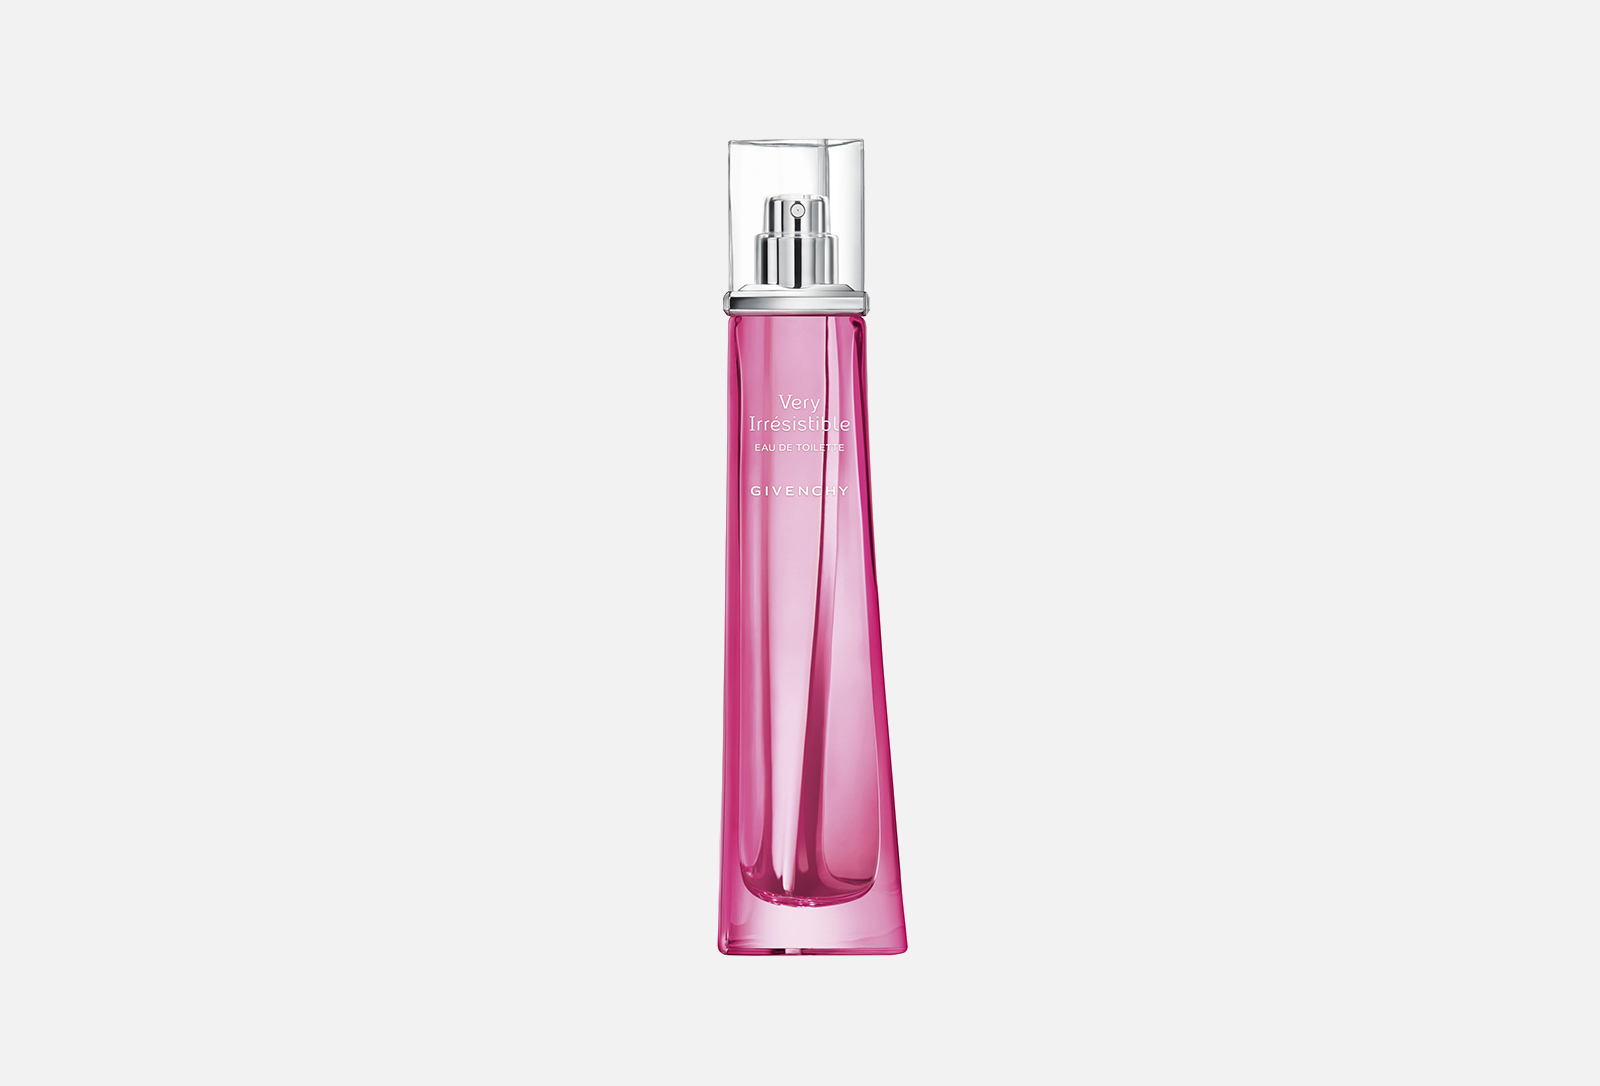 Givenchy very irresistible. Givenchy irresistible 50мл. Туалетная вода Givenchy very irresistible. Givenchy very irresistible EDT. Givenchy irresistible туалетная